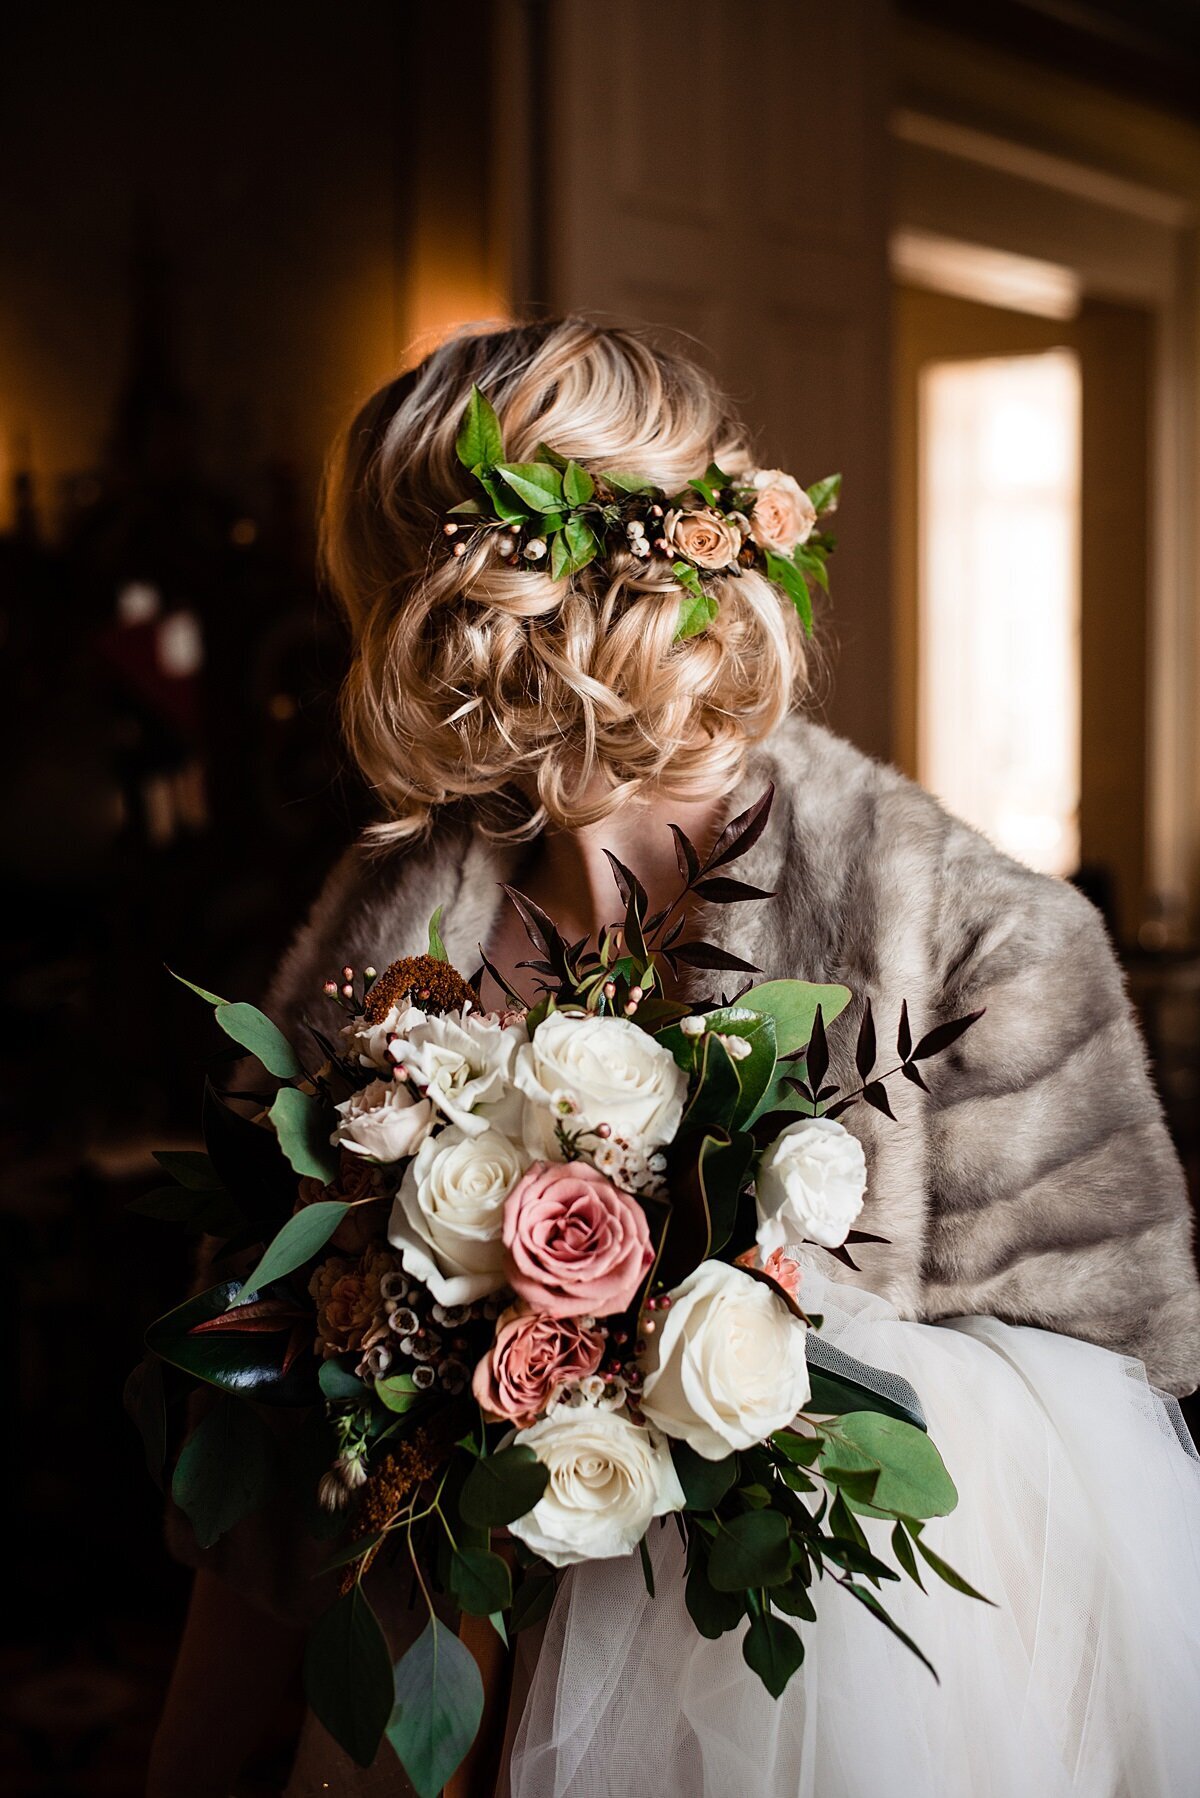 Detail of the bride's flowers. The bride has a floral hair comb in her blonde hair filled with greenery, blush flowers and purple berries.  The bride is wearing a fur wrap and is holding the tulle train of her skirt over her arm. In her hand is  a large bouquet of pink, blush and ivory roses with dark greenery accents.